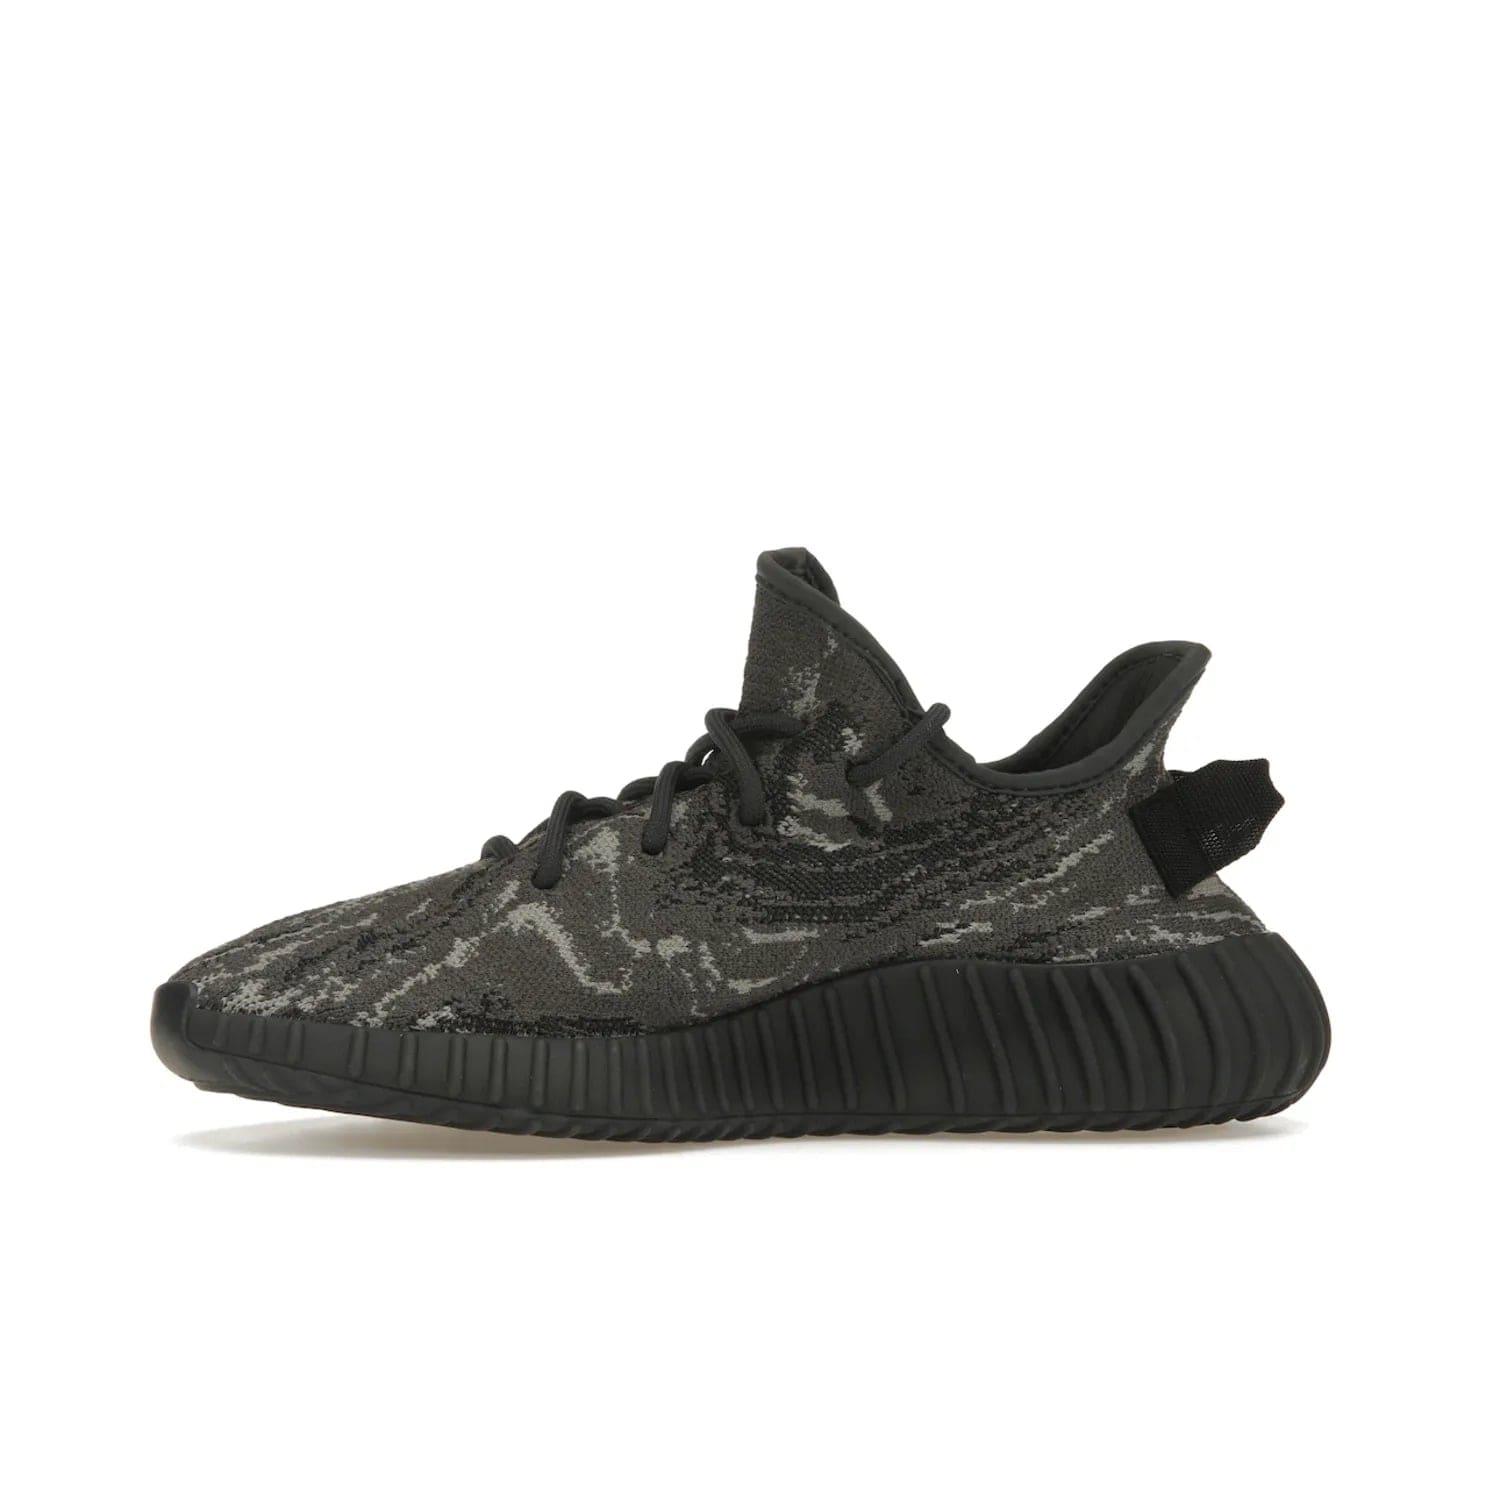 adidas Yeezy Boost 350 V2 MX Dark Salt - Image 18 - Only at www.BallersClubKickz.com - ##
The adidas Yeezy Boost 350 V2 MX Dark Salt offers a contemporary look with a signature combination of grey and black hues. Cushioned Boost midsole and side stripe allow for all day wear. Get the perfect fashion-forward addition with this sleek sneaker for $230.